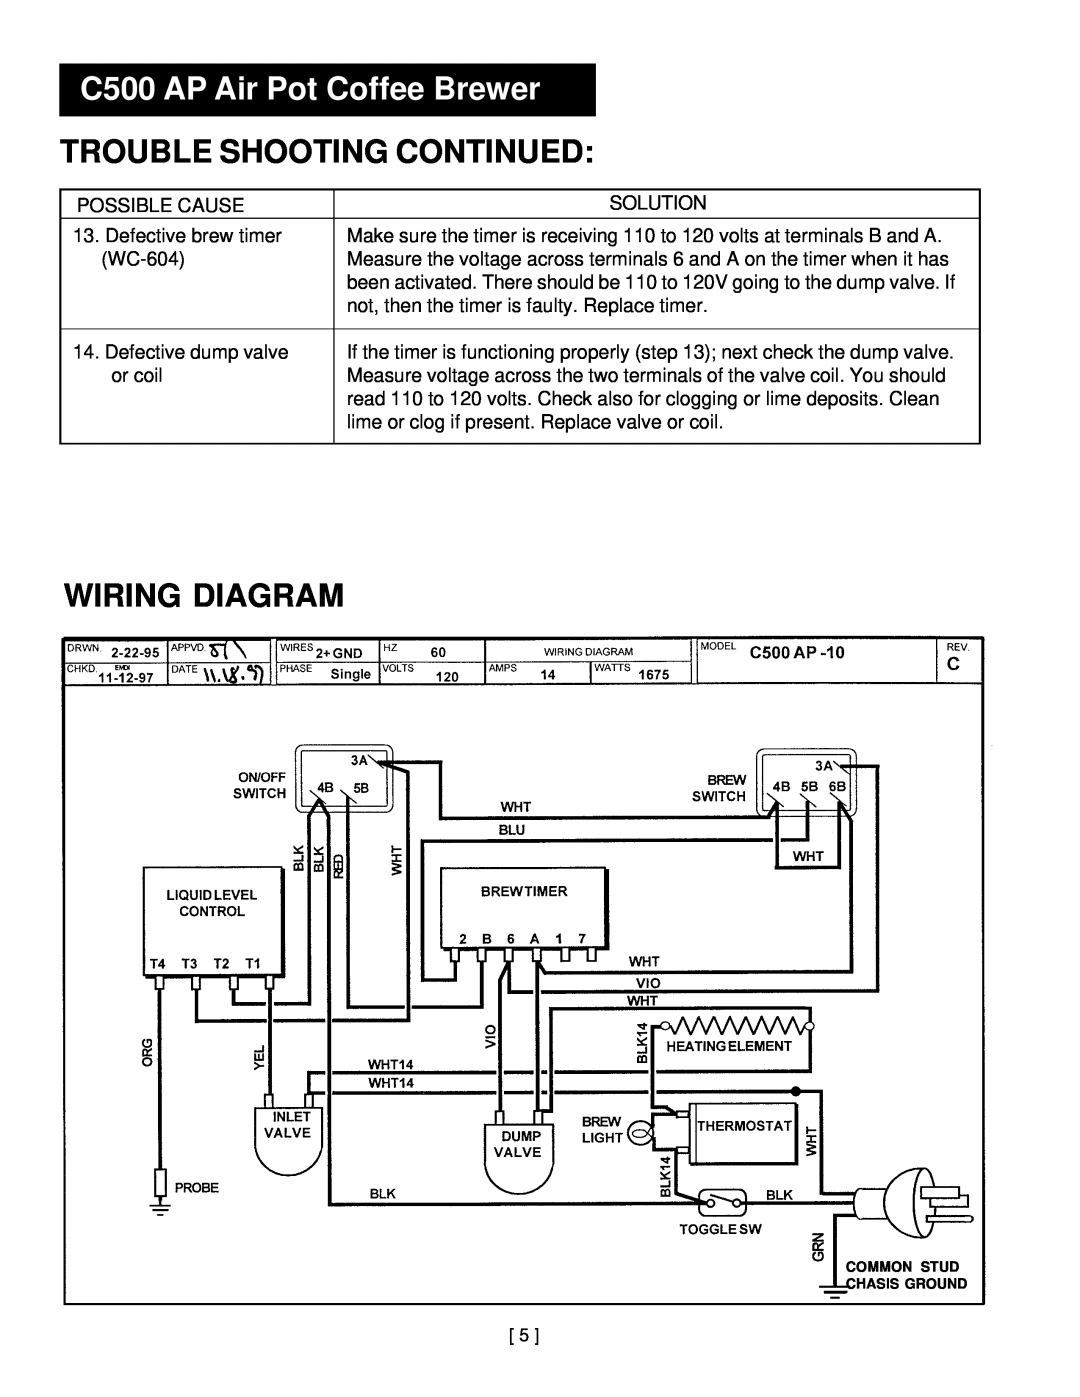 Wibur Curtis Company C500APT service manual Wiring Diagram, C500 AP Air Pot Coffee Brewer, Trouble Shooting Continued 